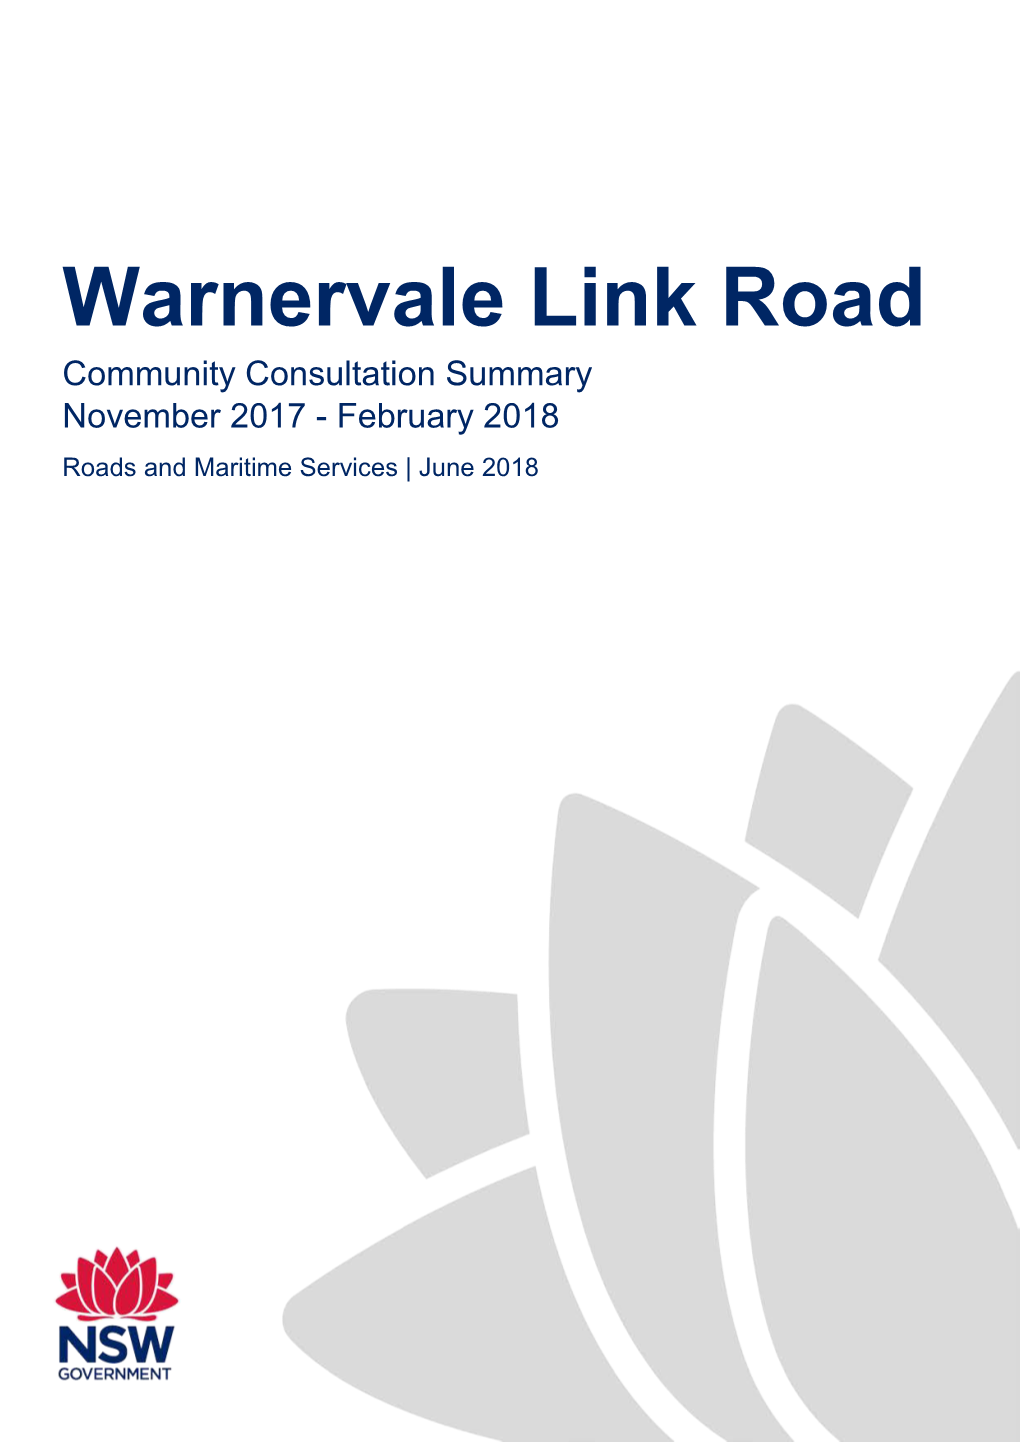 Warnervale Link Road Community Consultation Summary November 2017 - February 2018 Roads and Maritime Services | June 2018